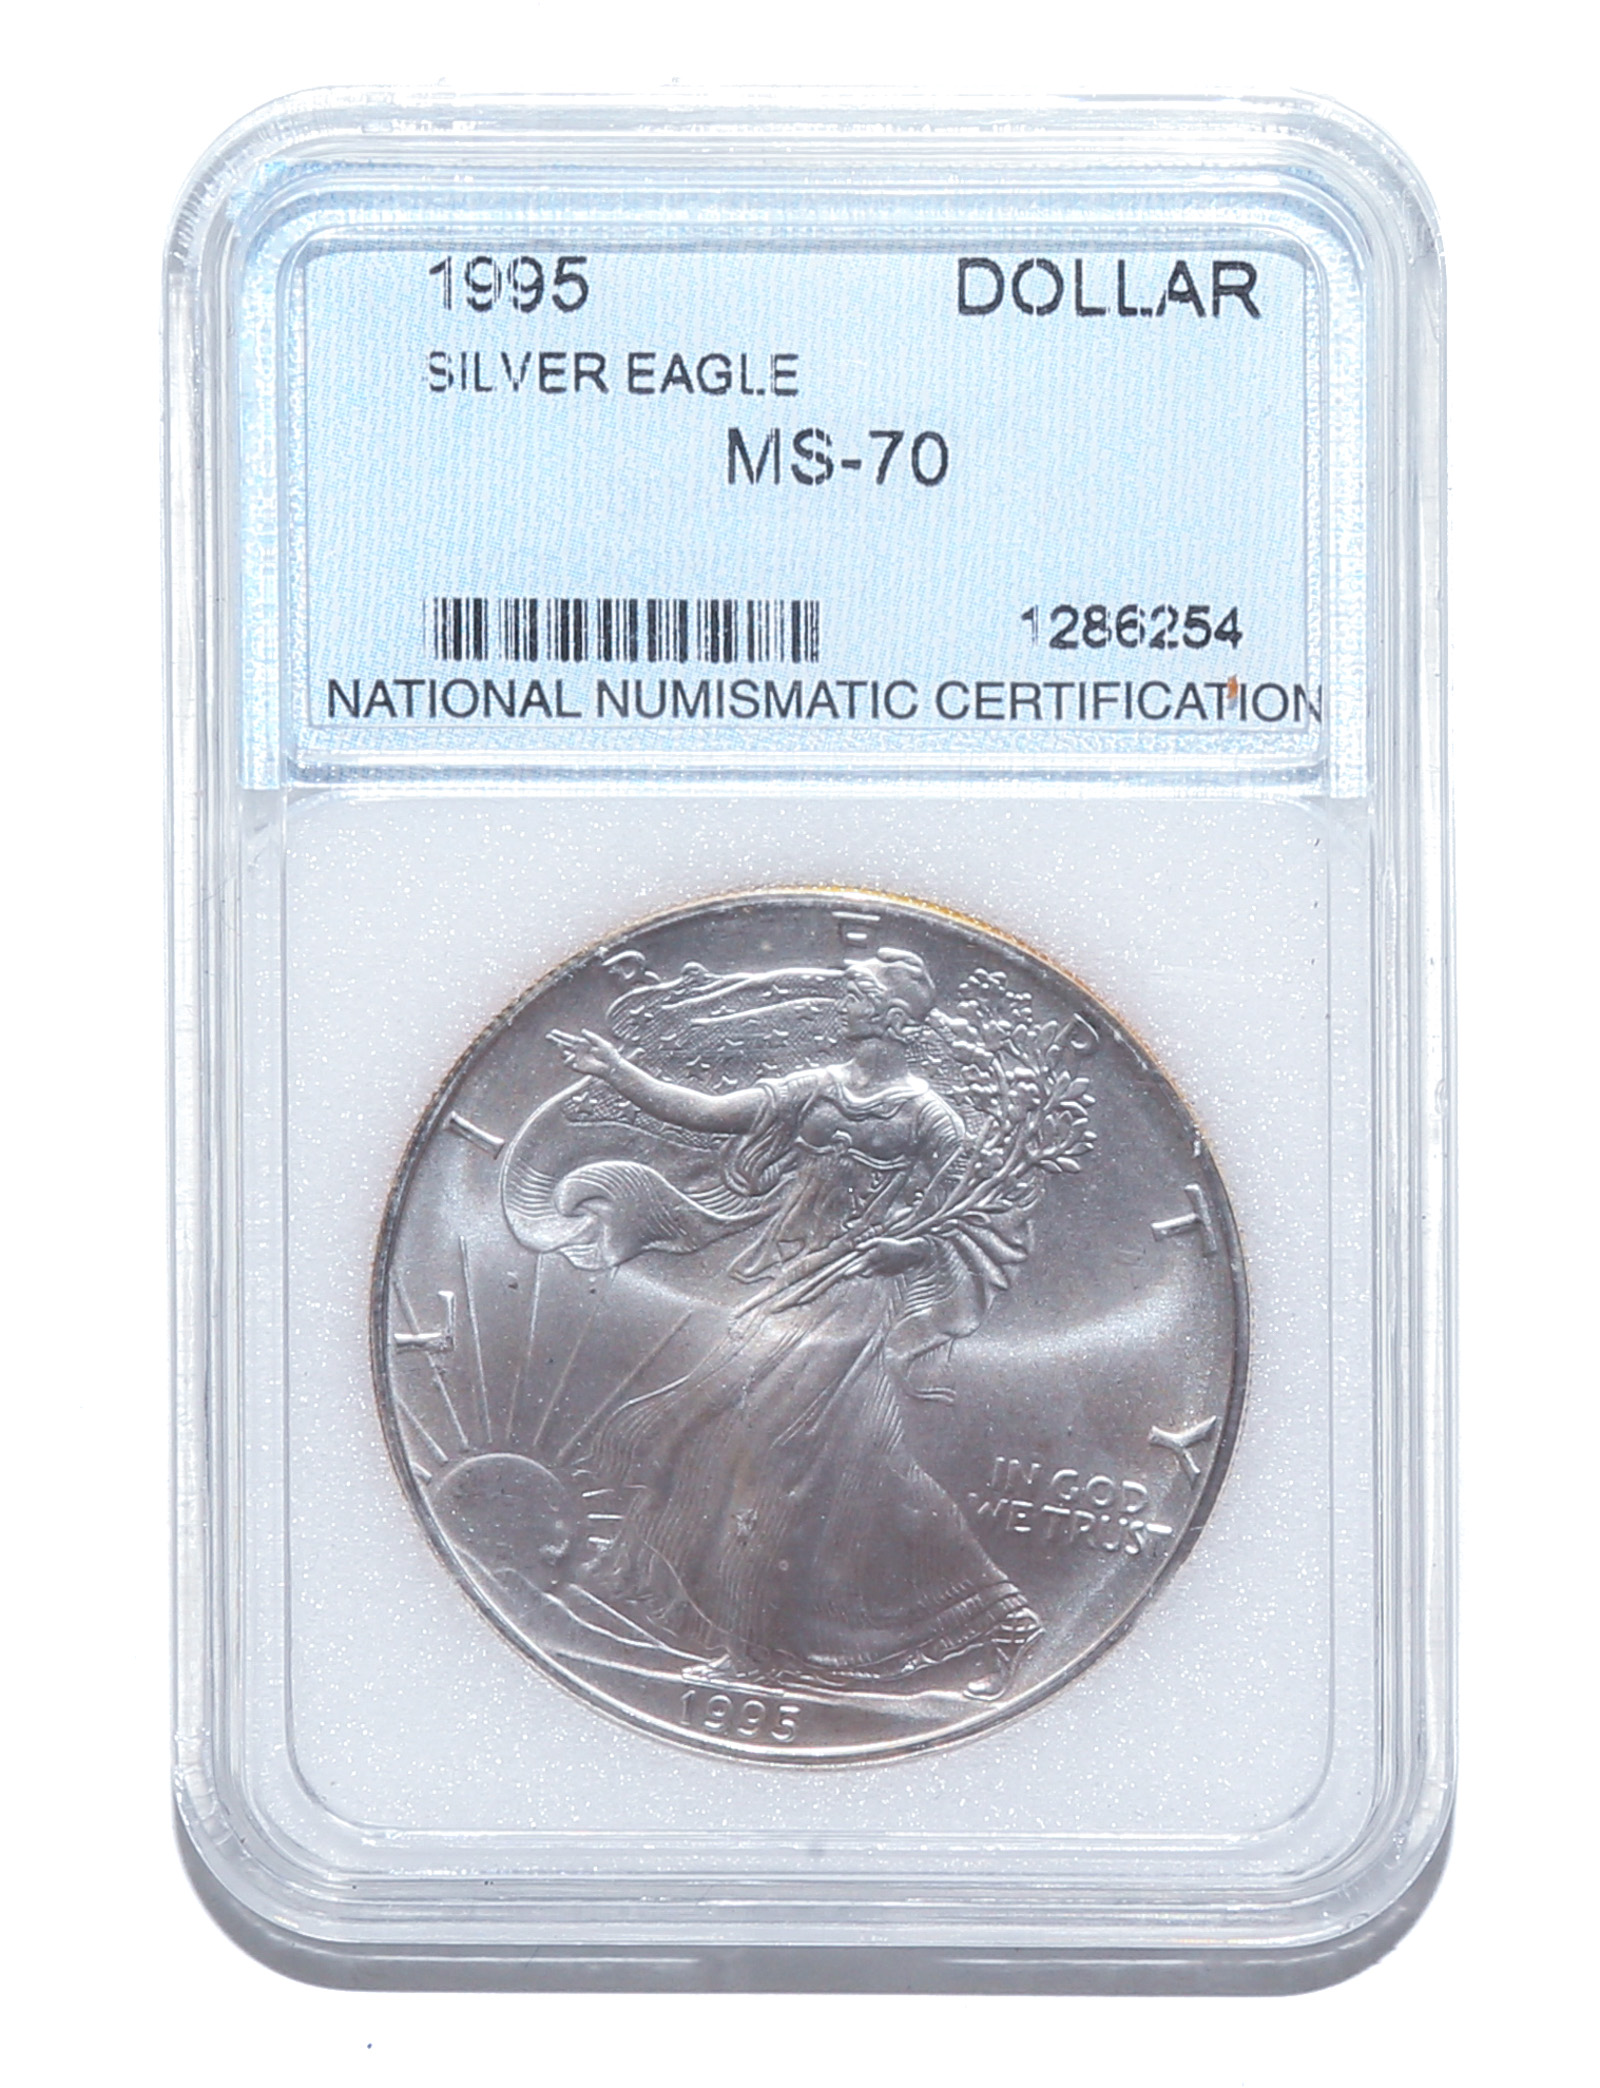 1995 SILVER EAGLE NNC MS70 This